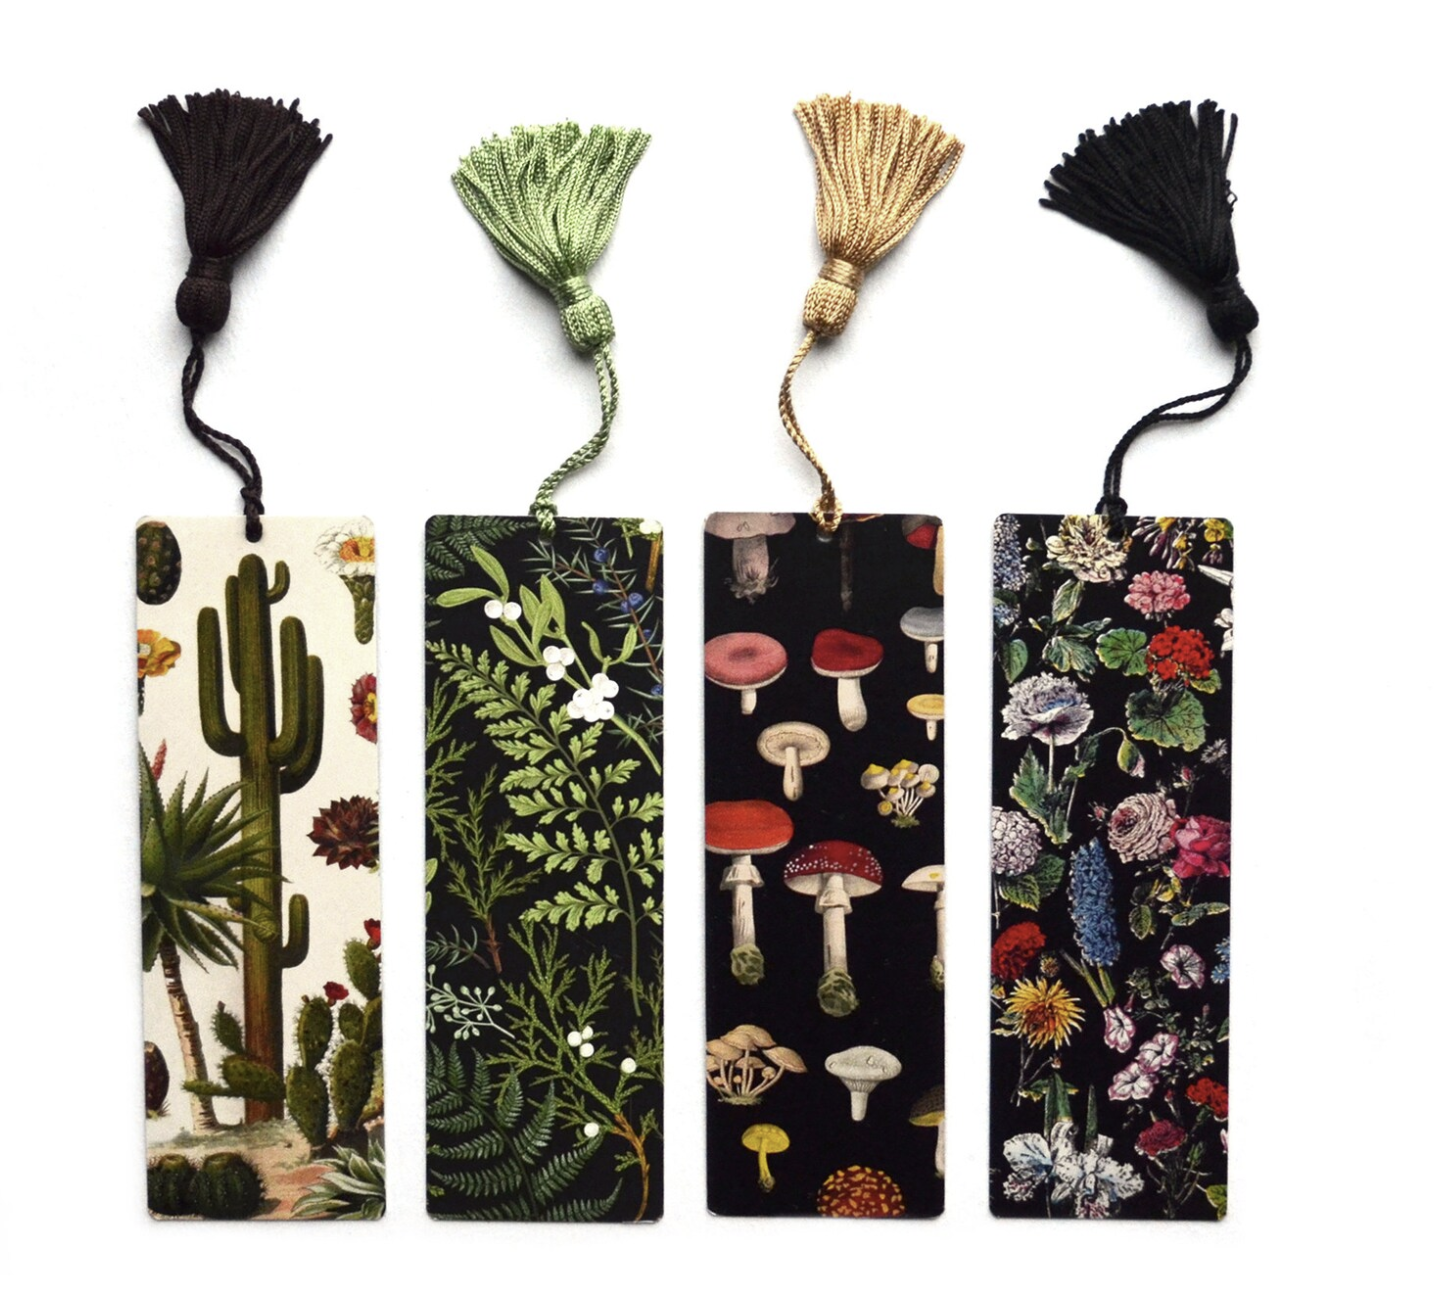 Four reversible botanical bookmarks featuring illustrations of cactuses, ferns, mushrooms, and flowers with tassels.